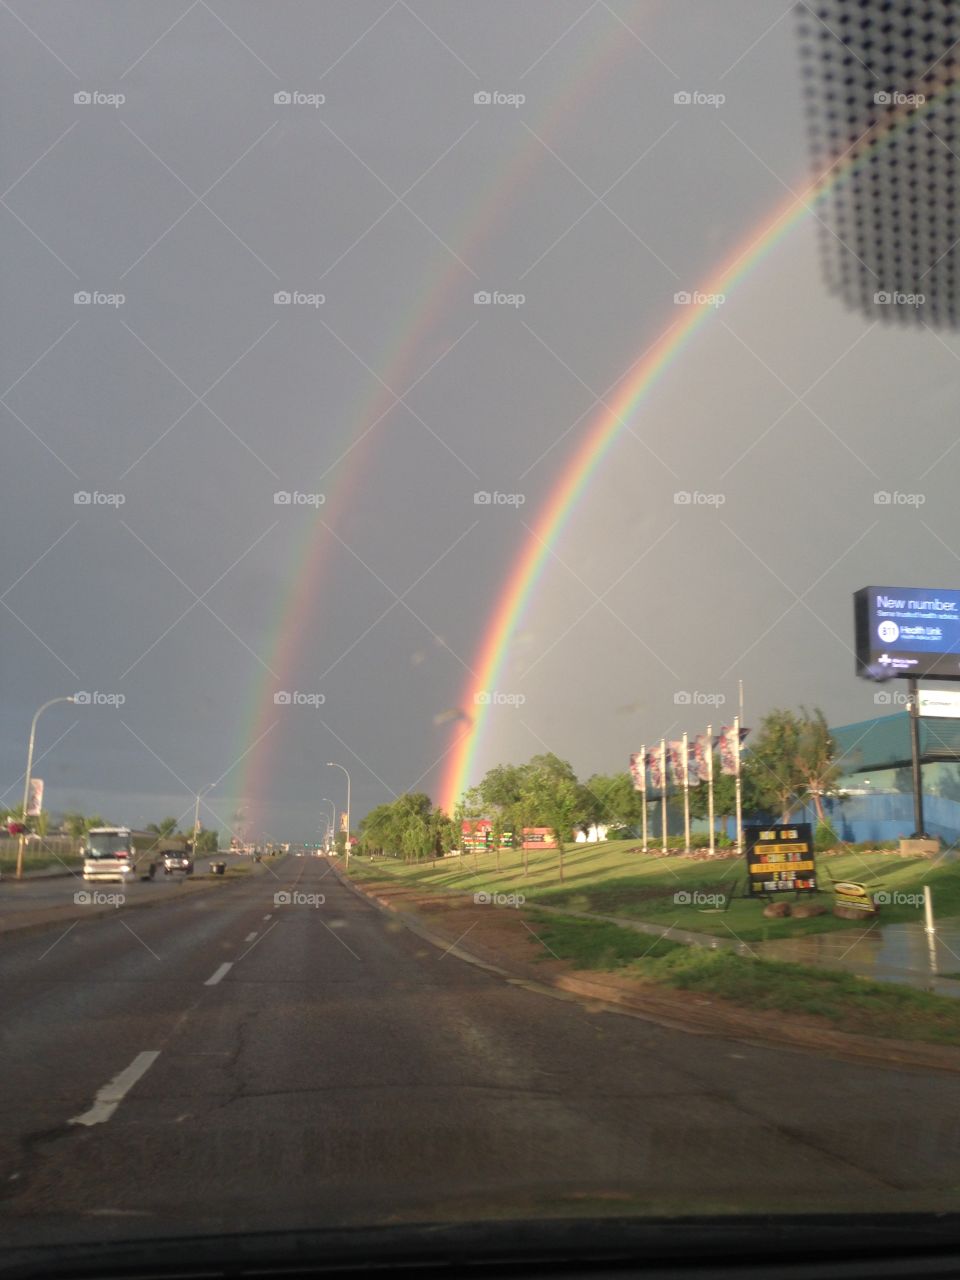 Caught this awesome double rainbow after a hail storm